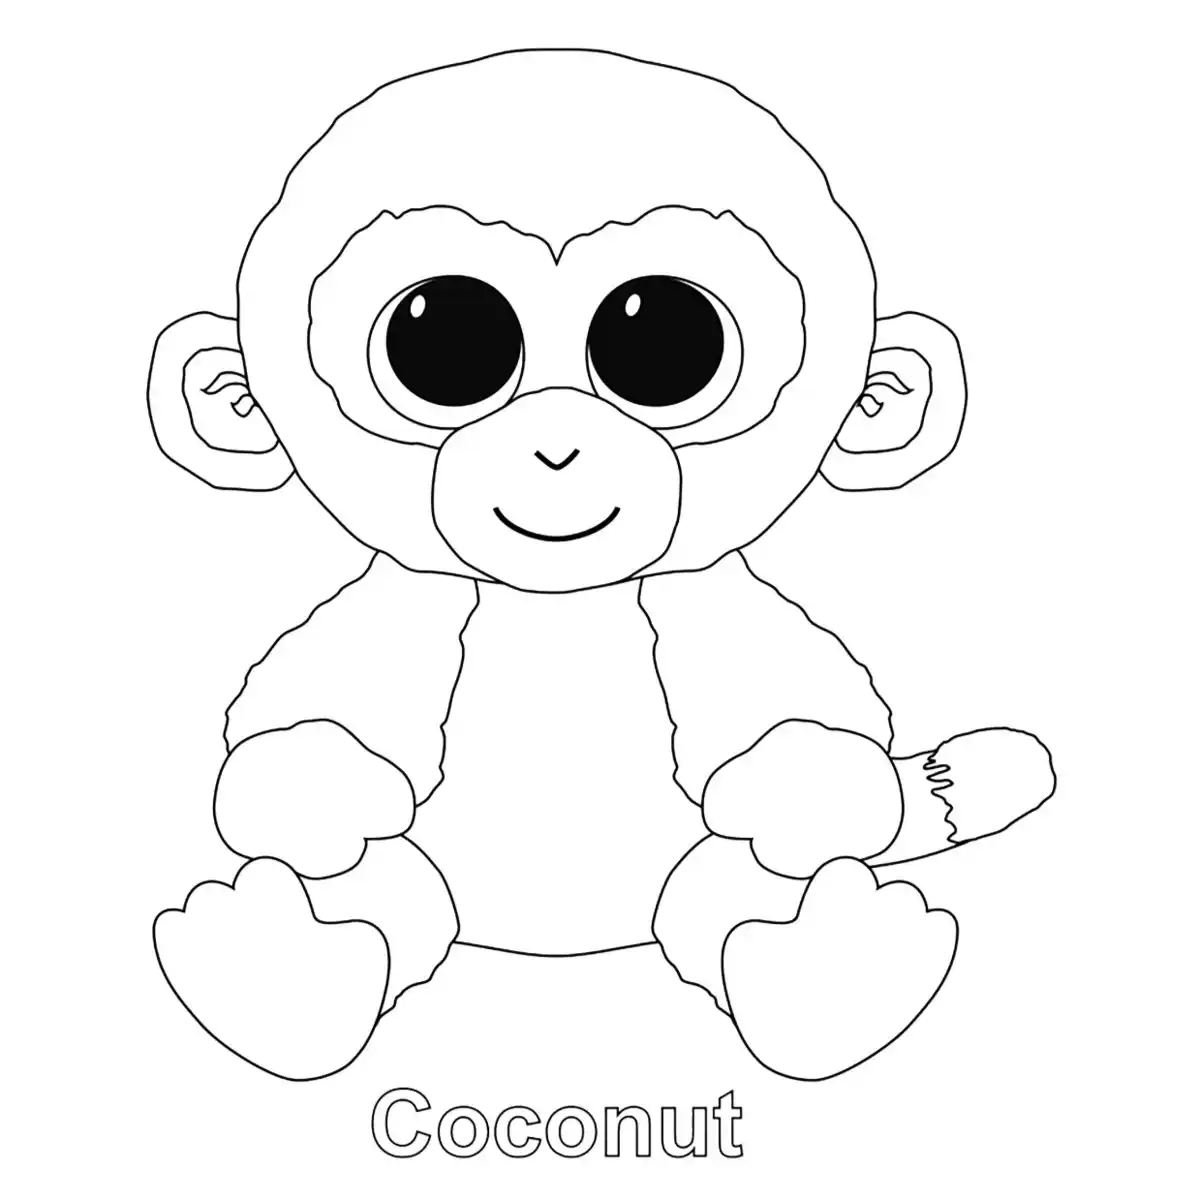 Free Coloring Pages PDF, Coconut Monkey Beanie Boo Coloring Pages Pdf